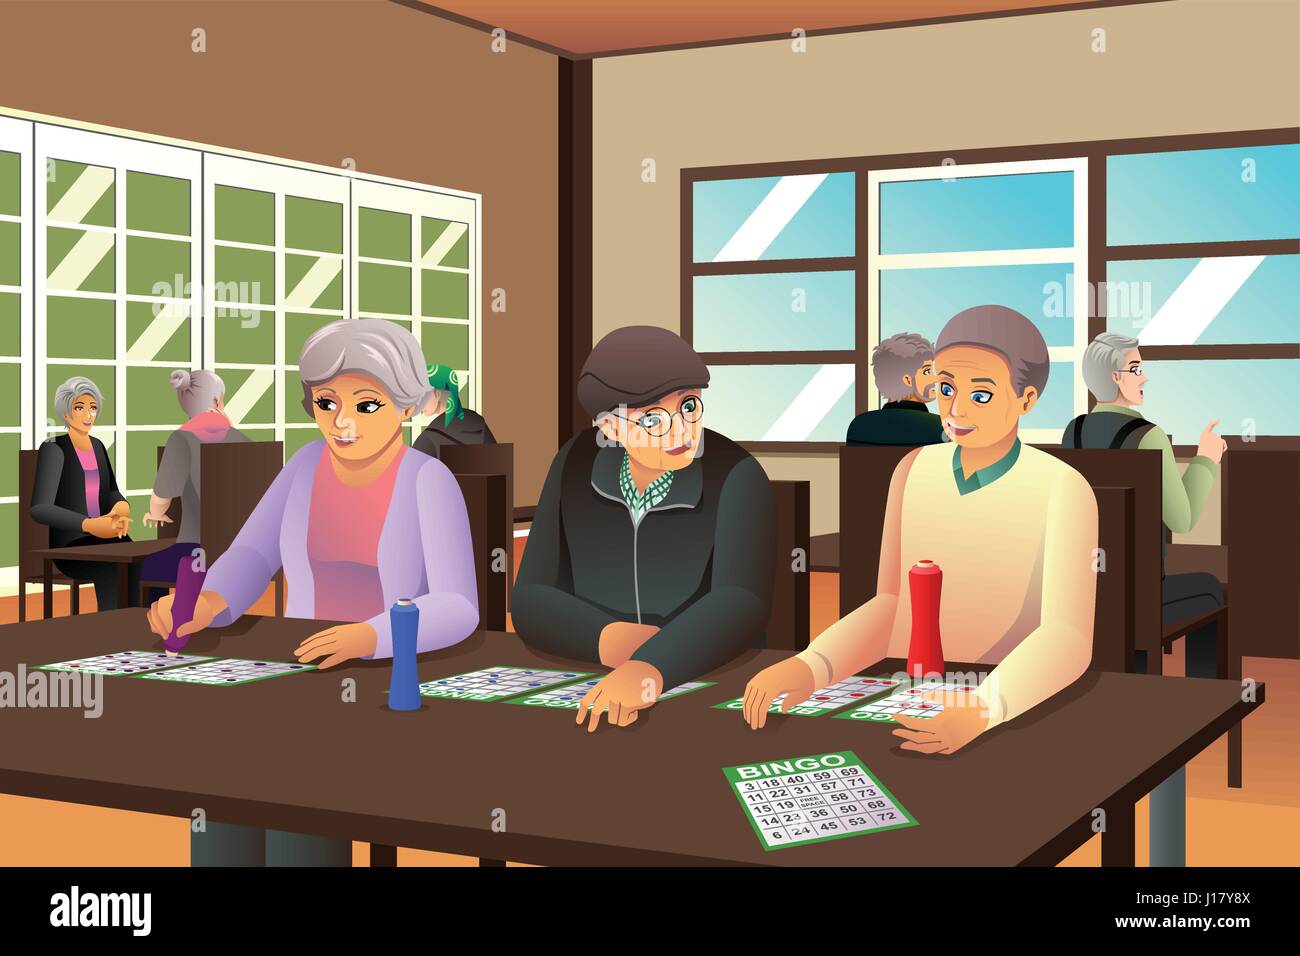 A vector illustration of happy elderly playing bingo together Stock Vector